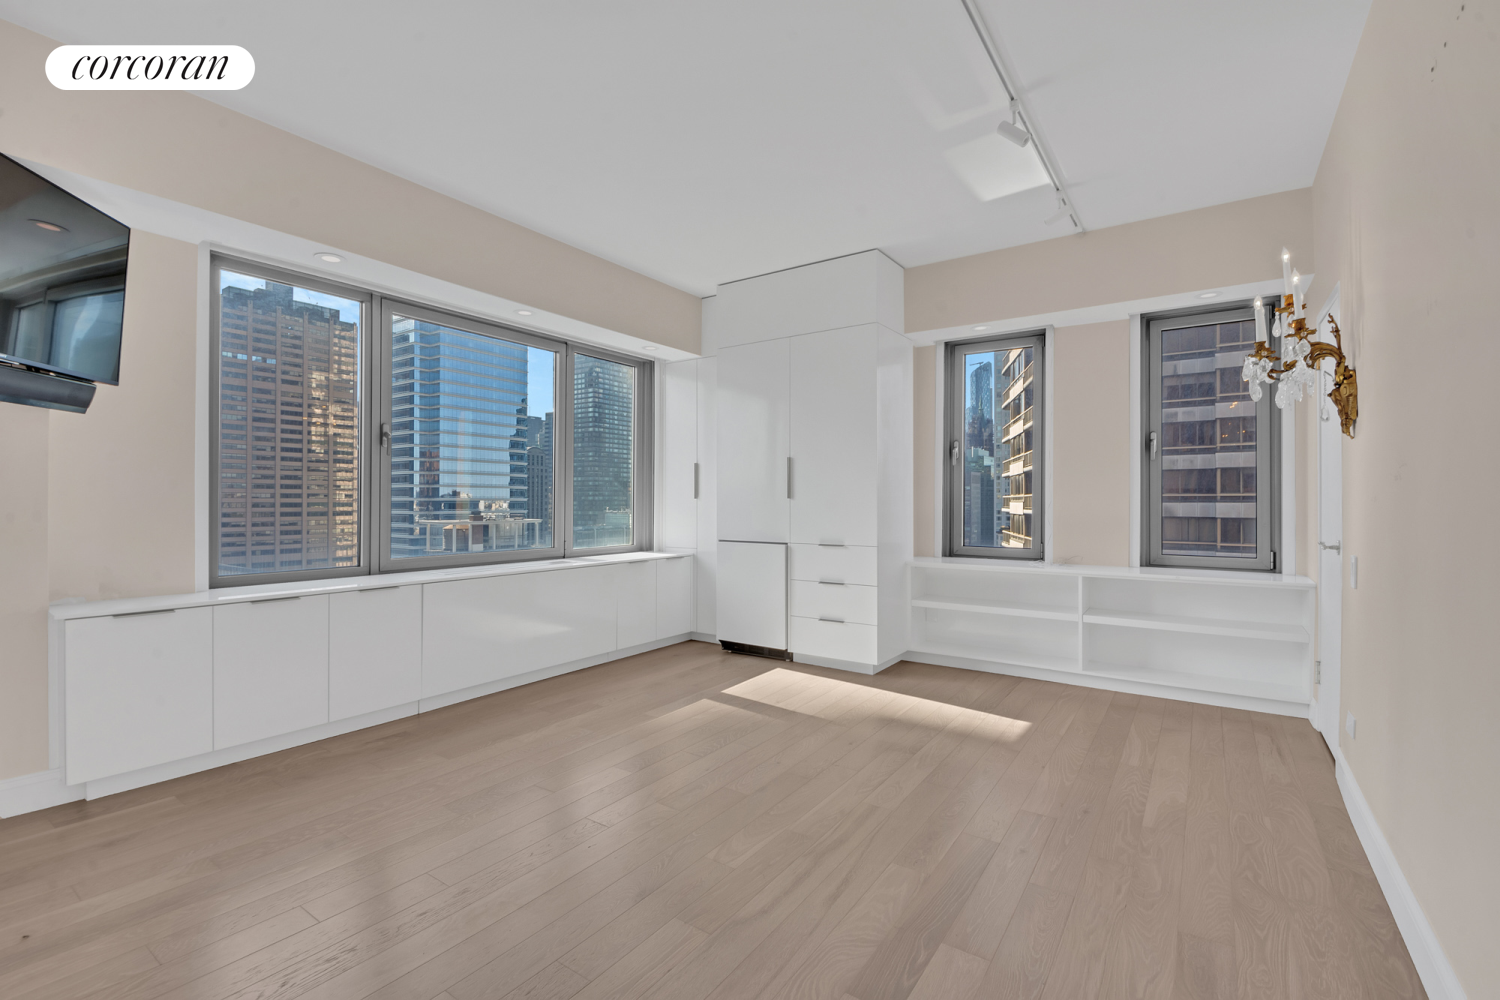 200 East 62nd Street 23E, Lenox Hill, Upper East Side, NYC - 4 Bedrooms  
4.5 Bathrooms  
6 Rooms - 